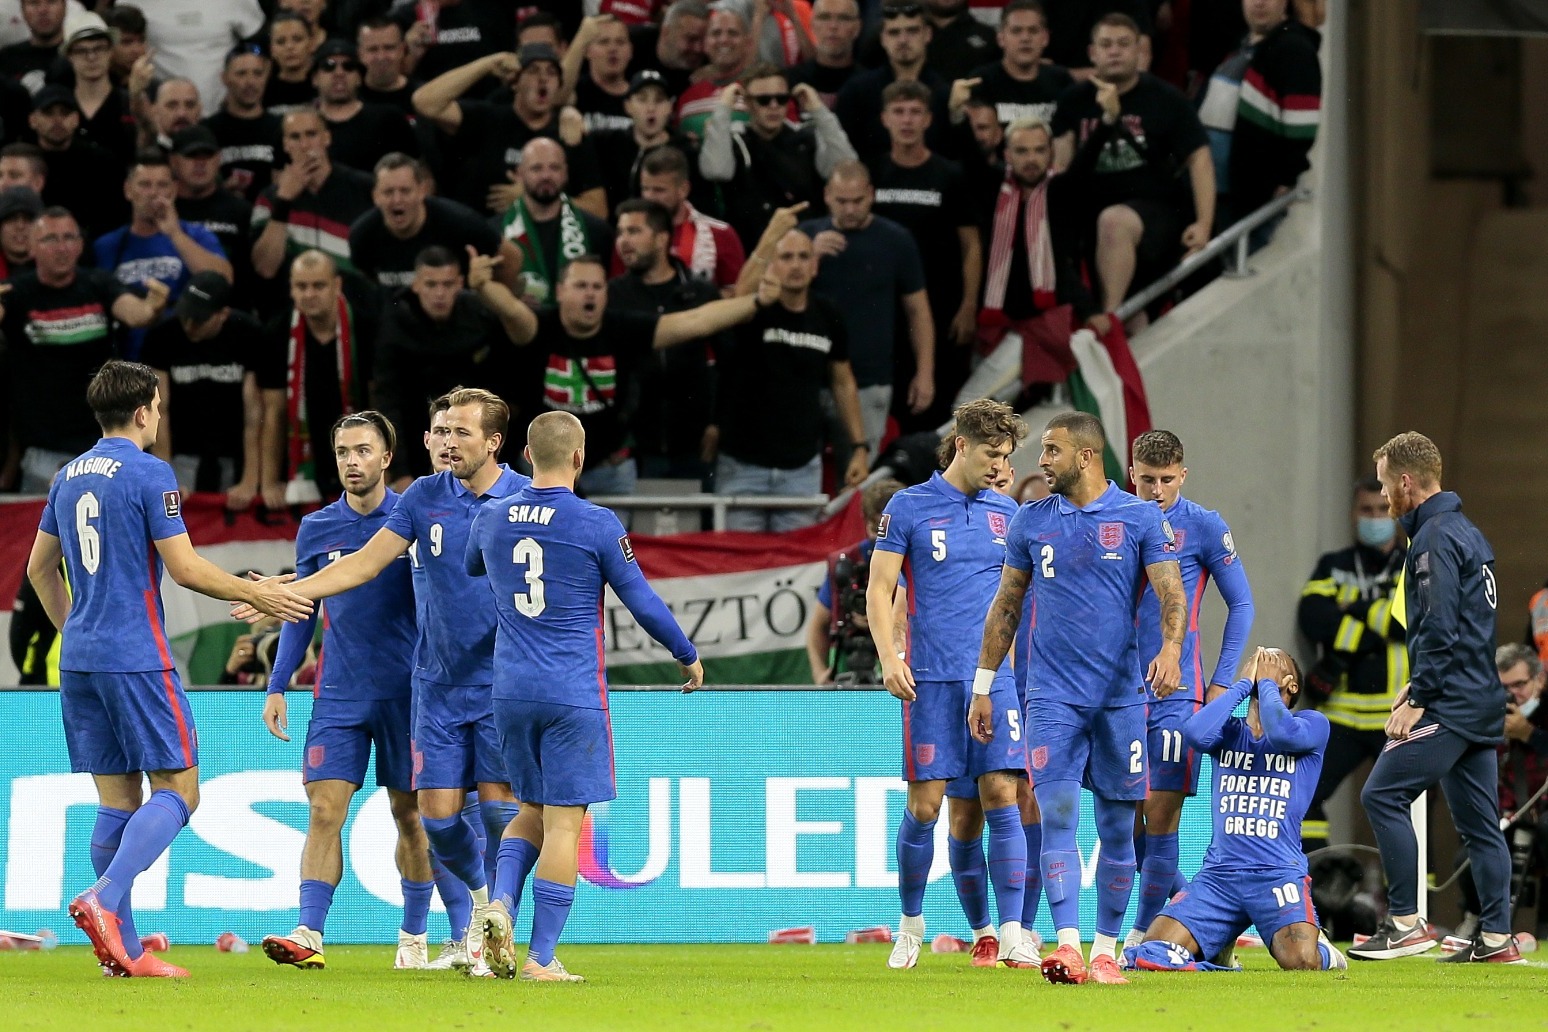 FA urges FIFA to investigate after England players abused in Hungary 